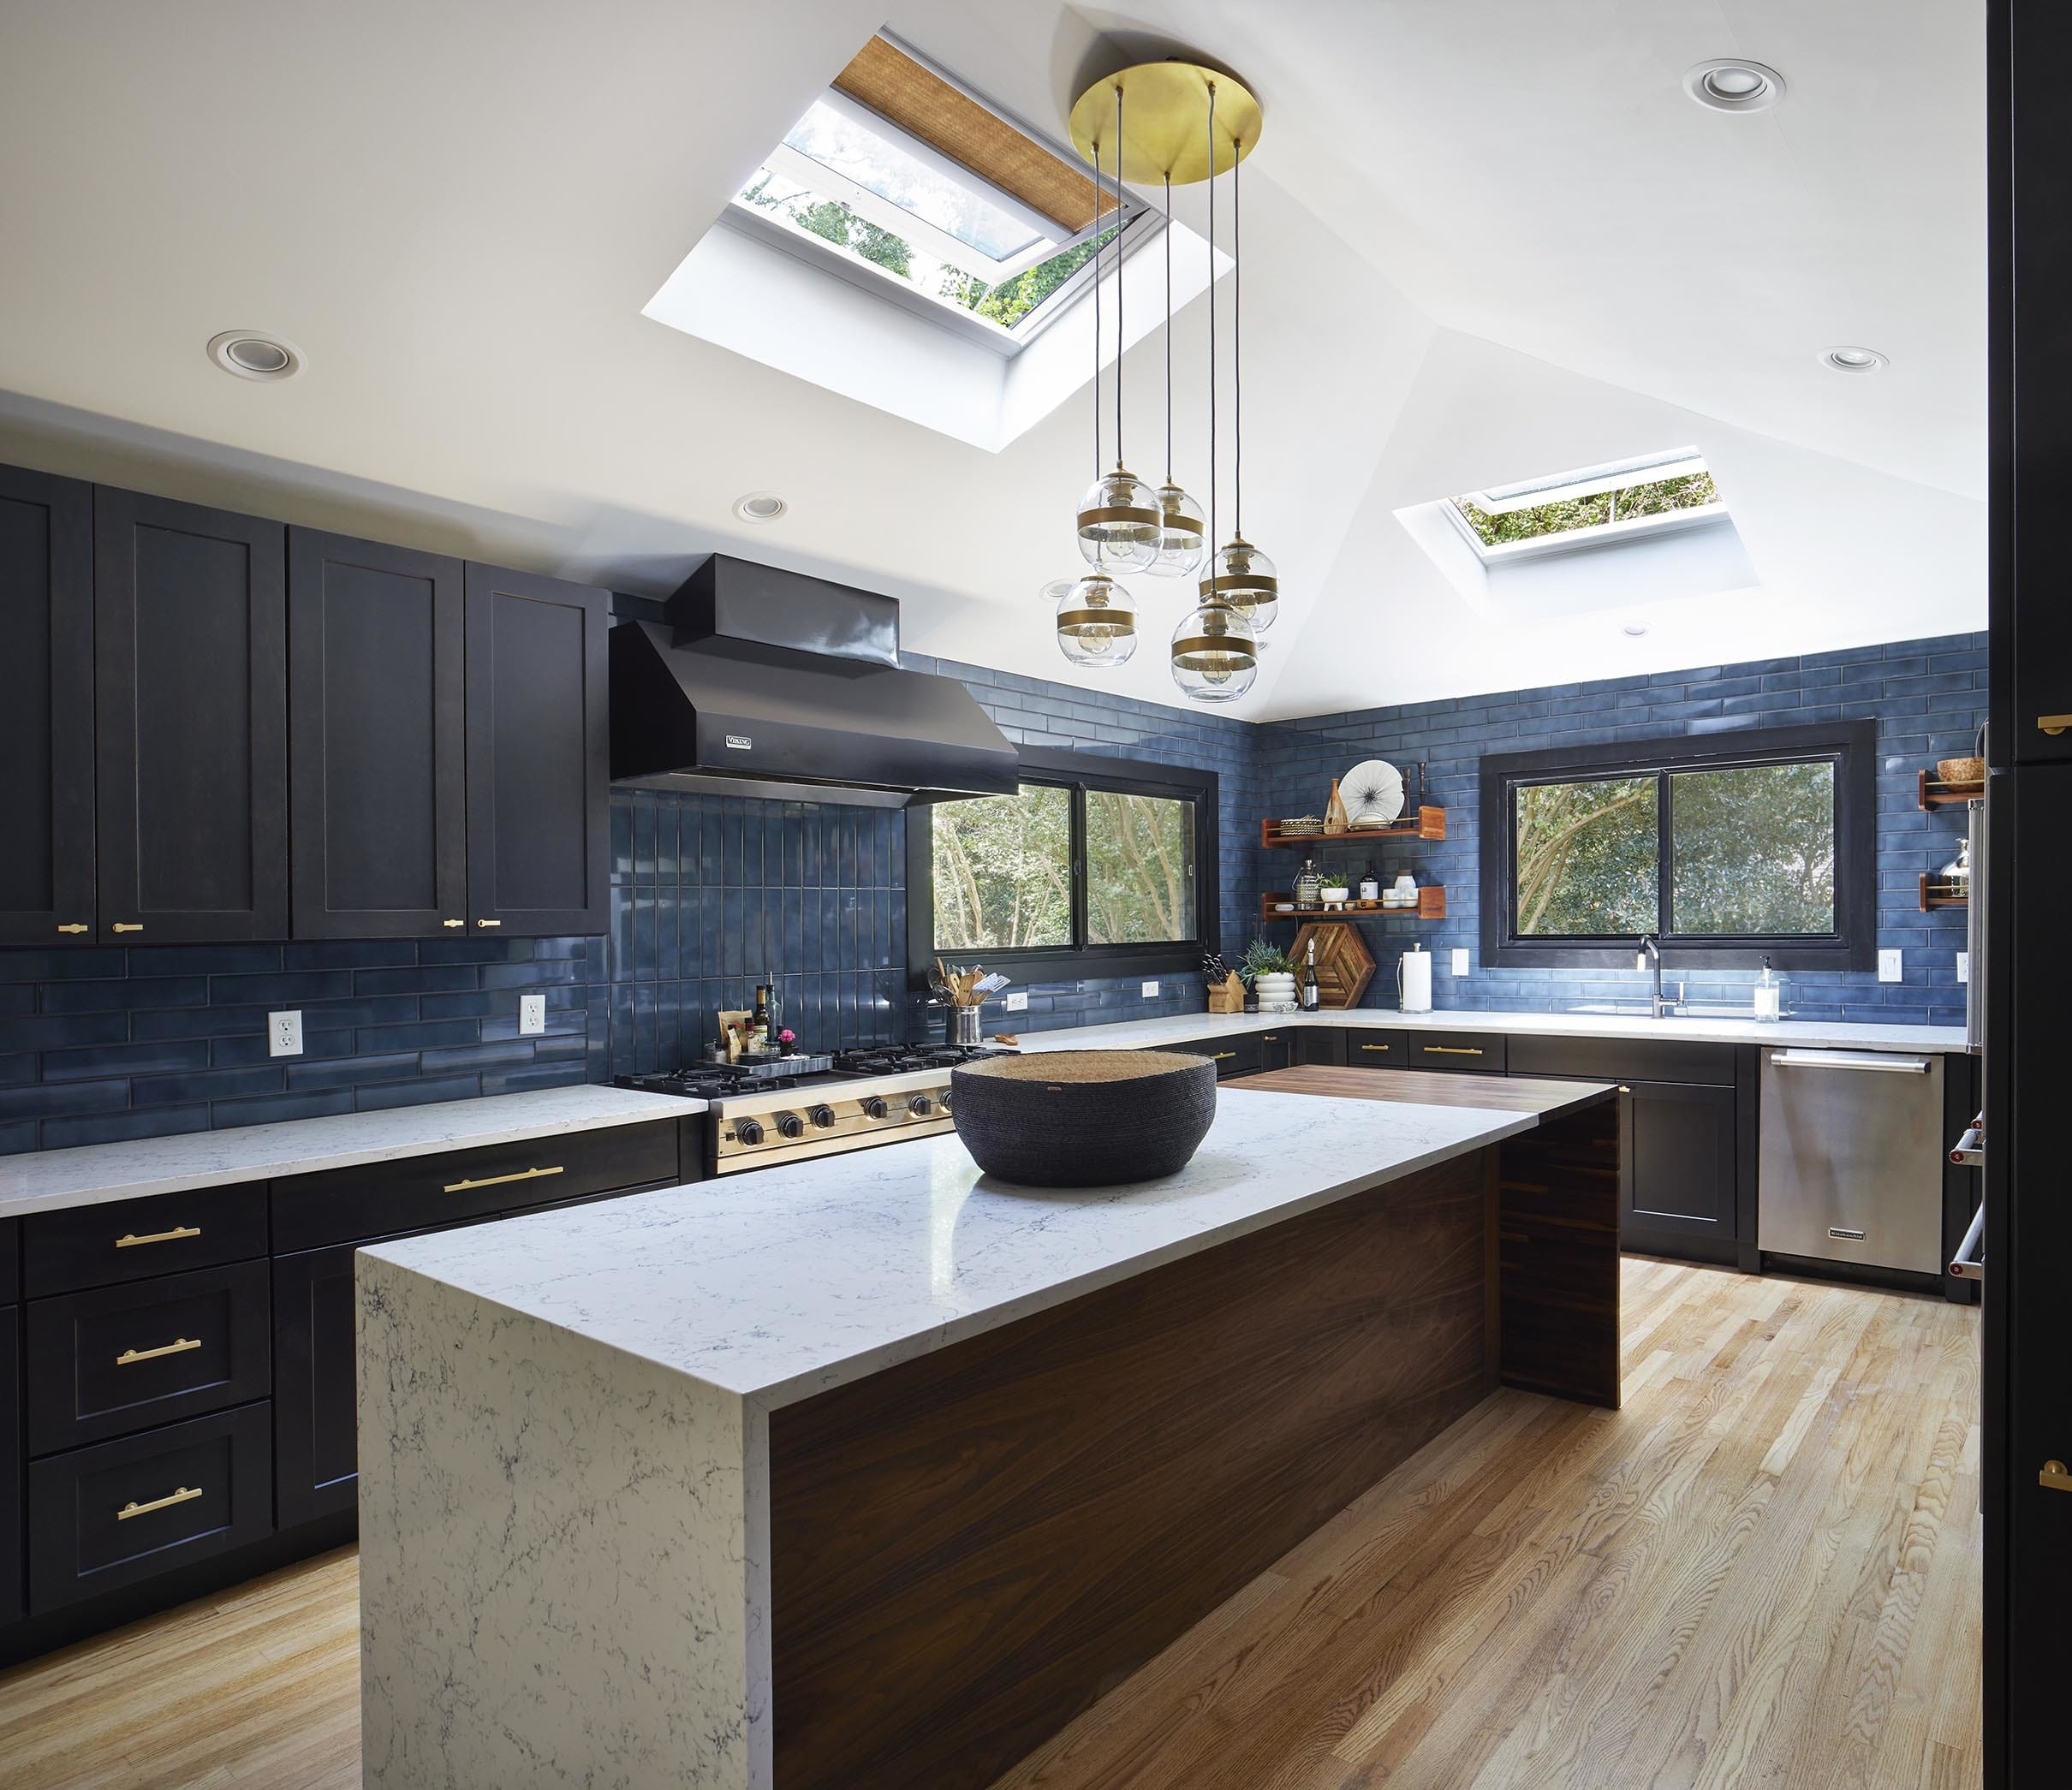 Blue black kitchen skylights with shades